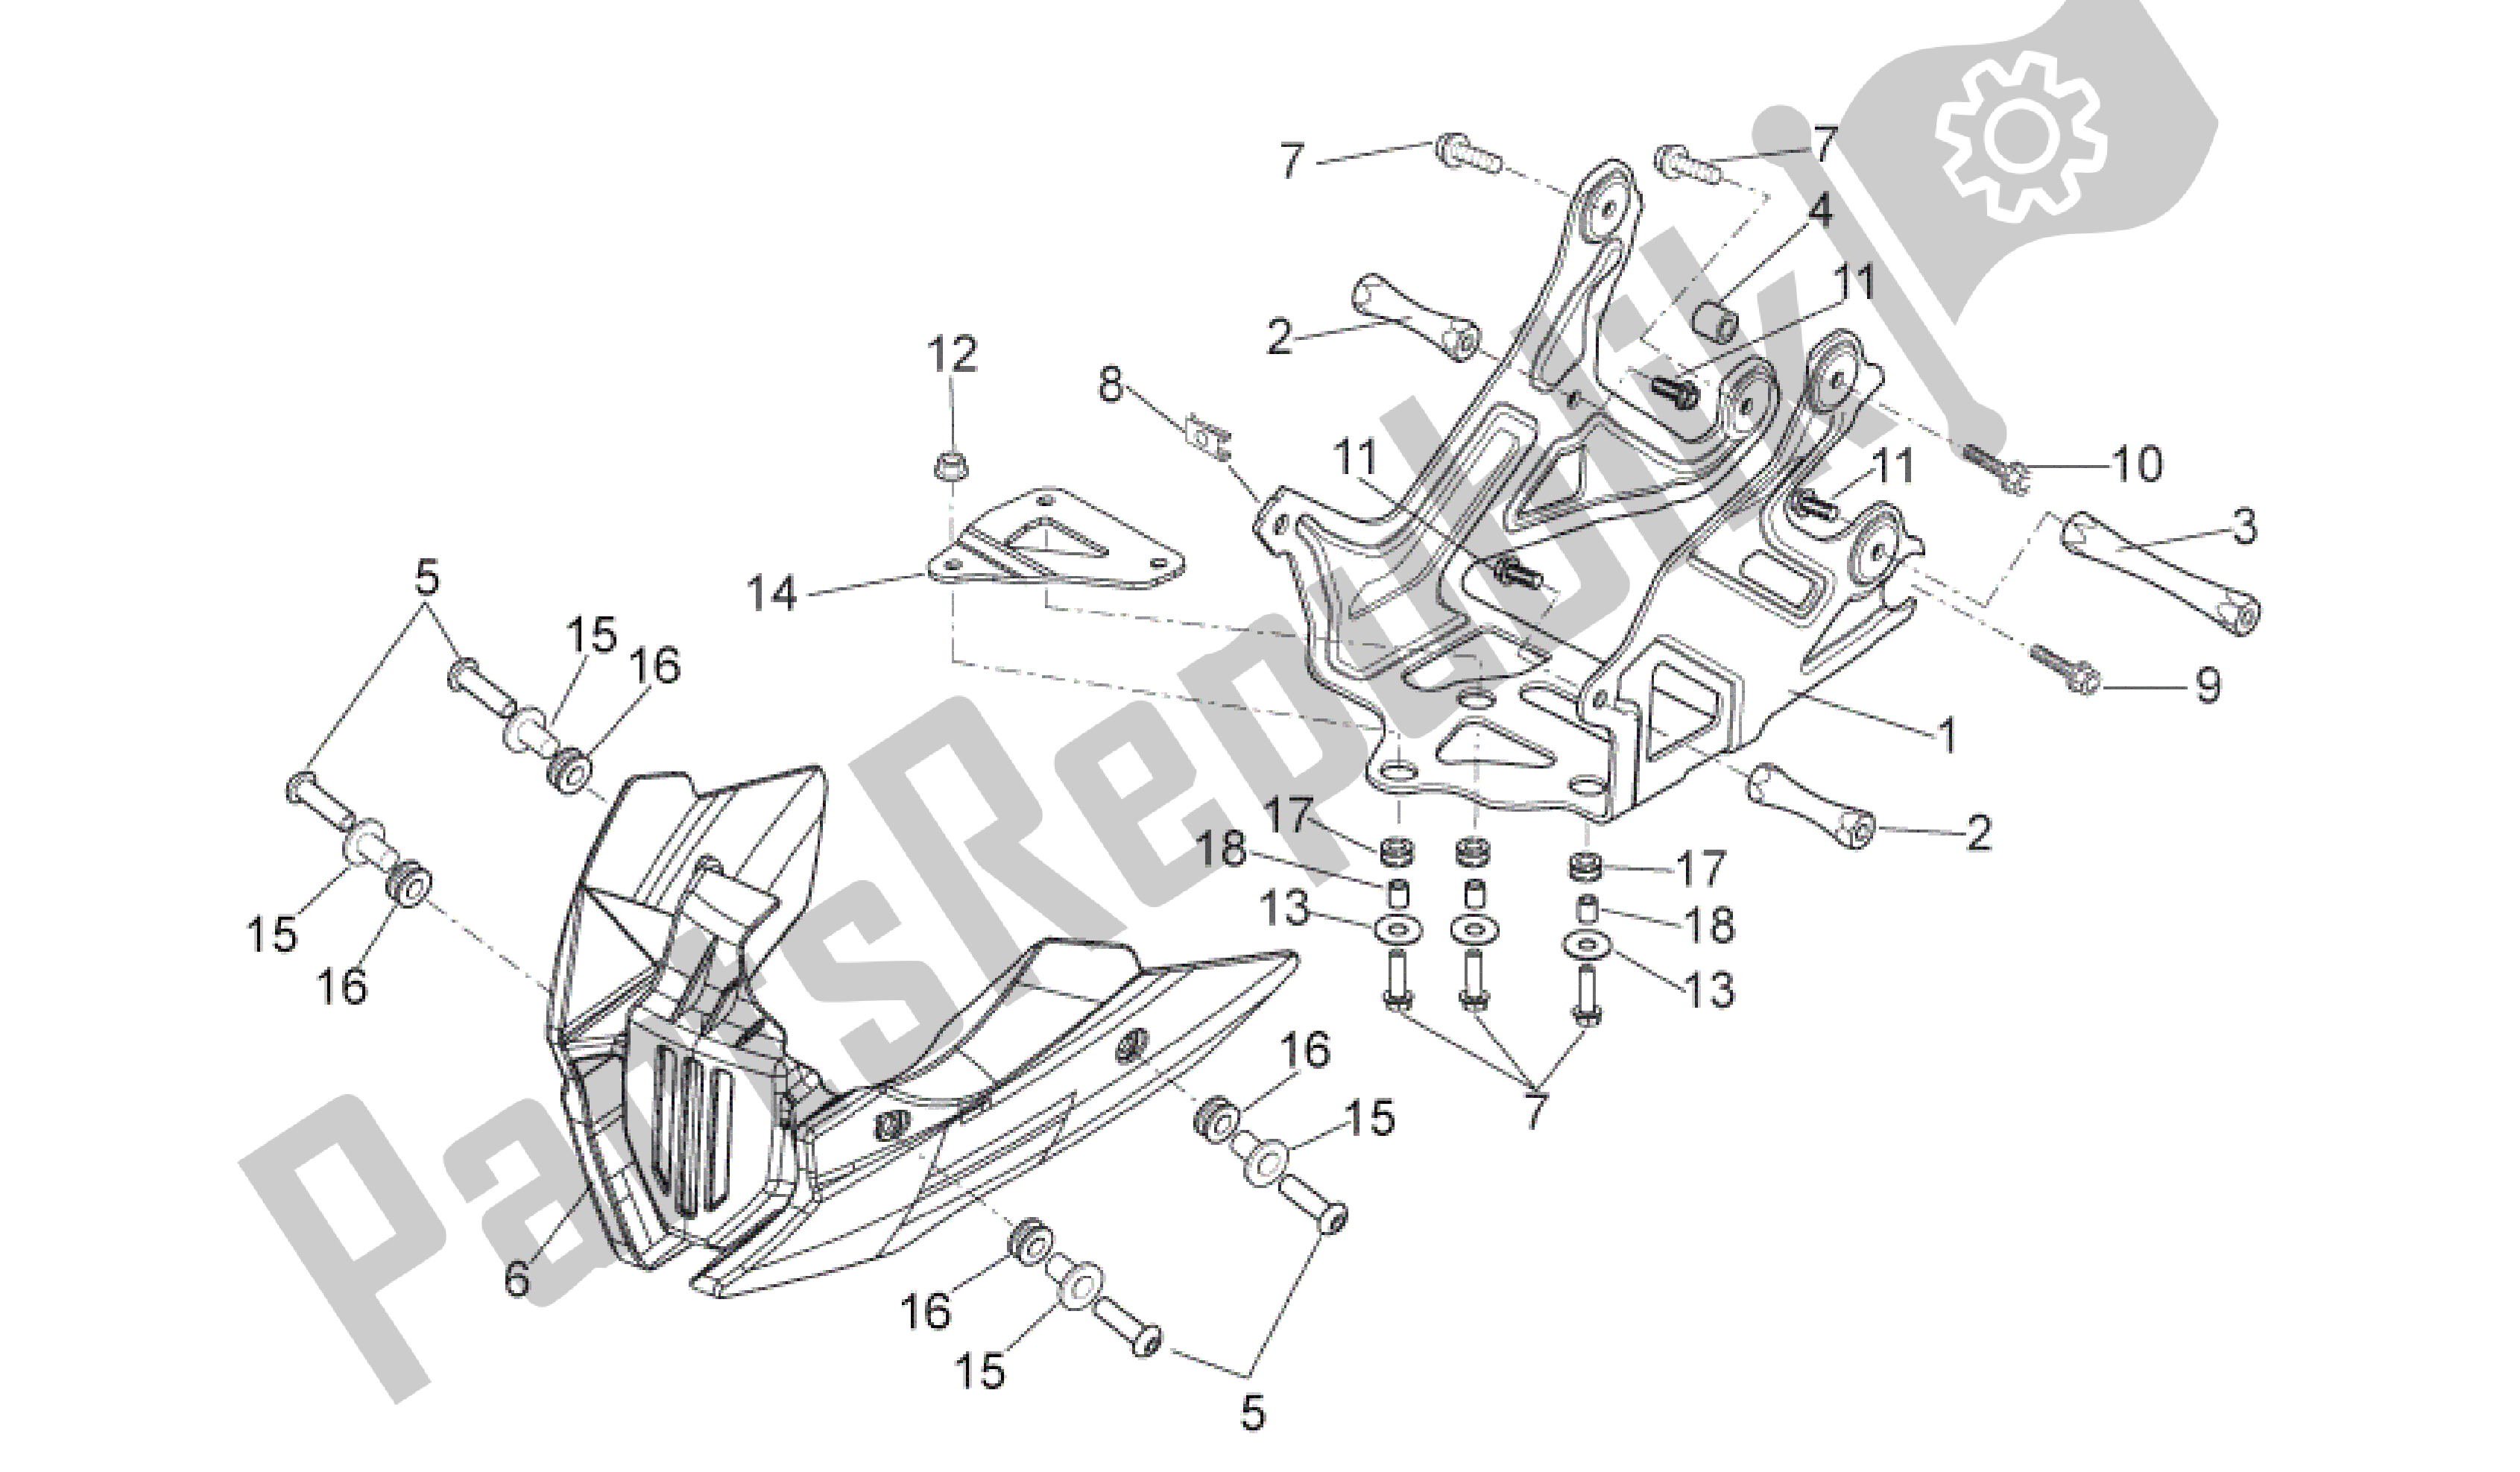 All parts for the Holder of the Aprilia Shiver 750 2009